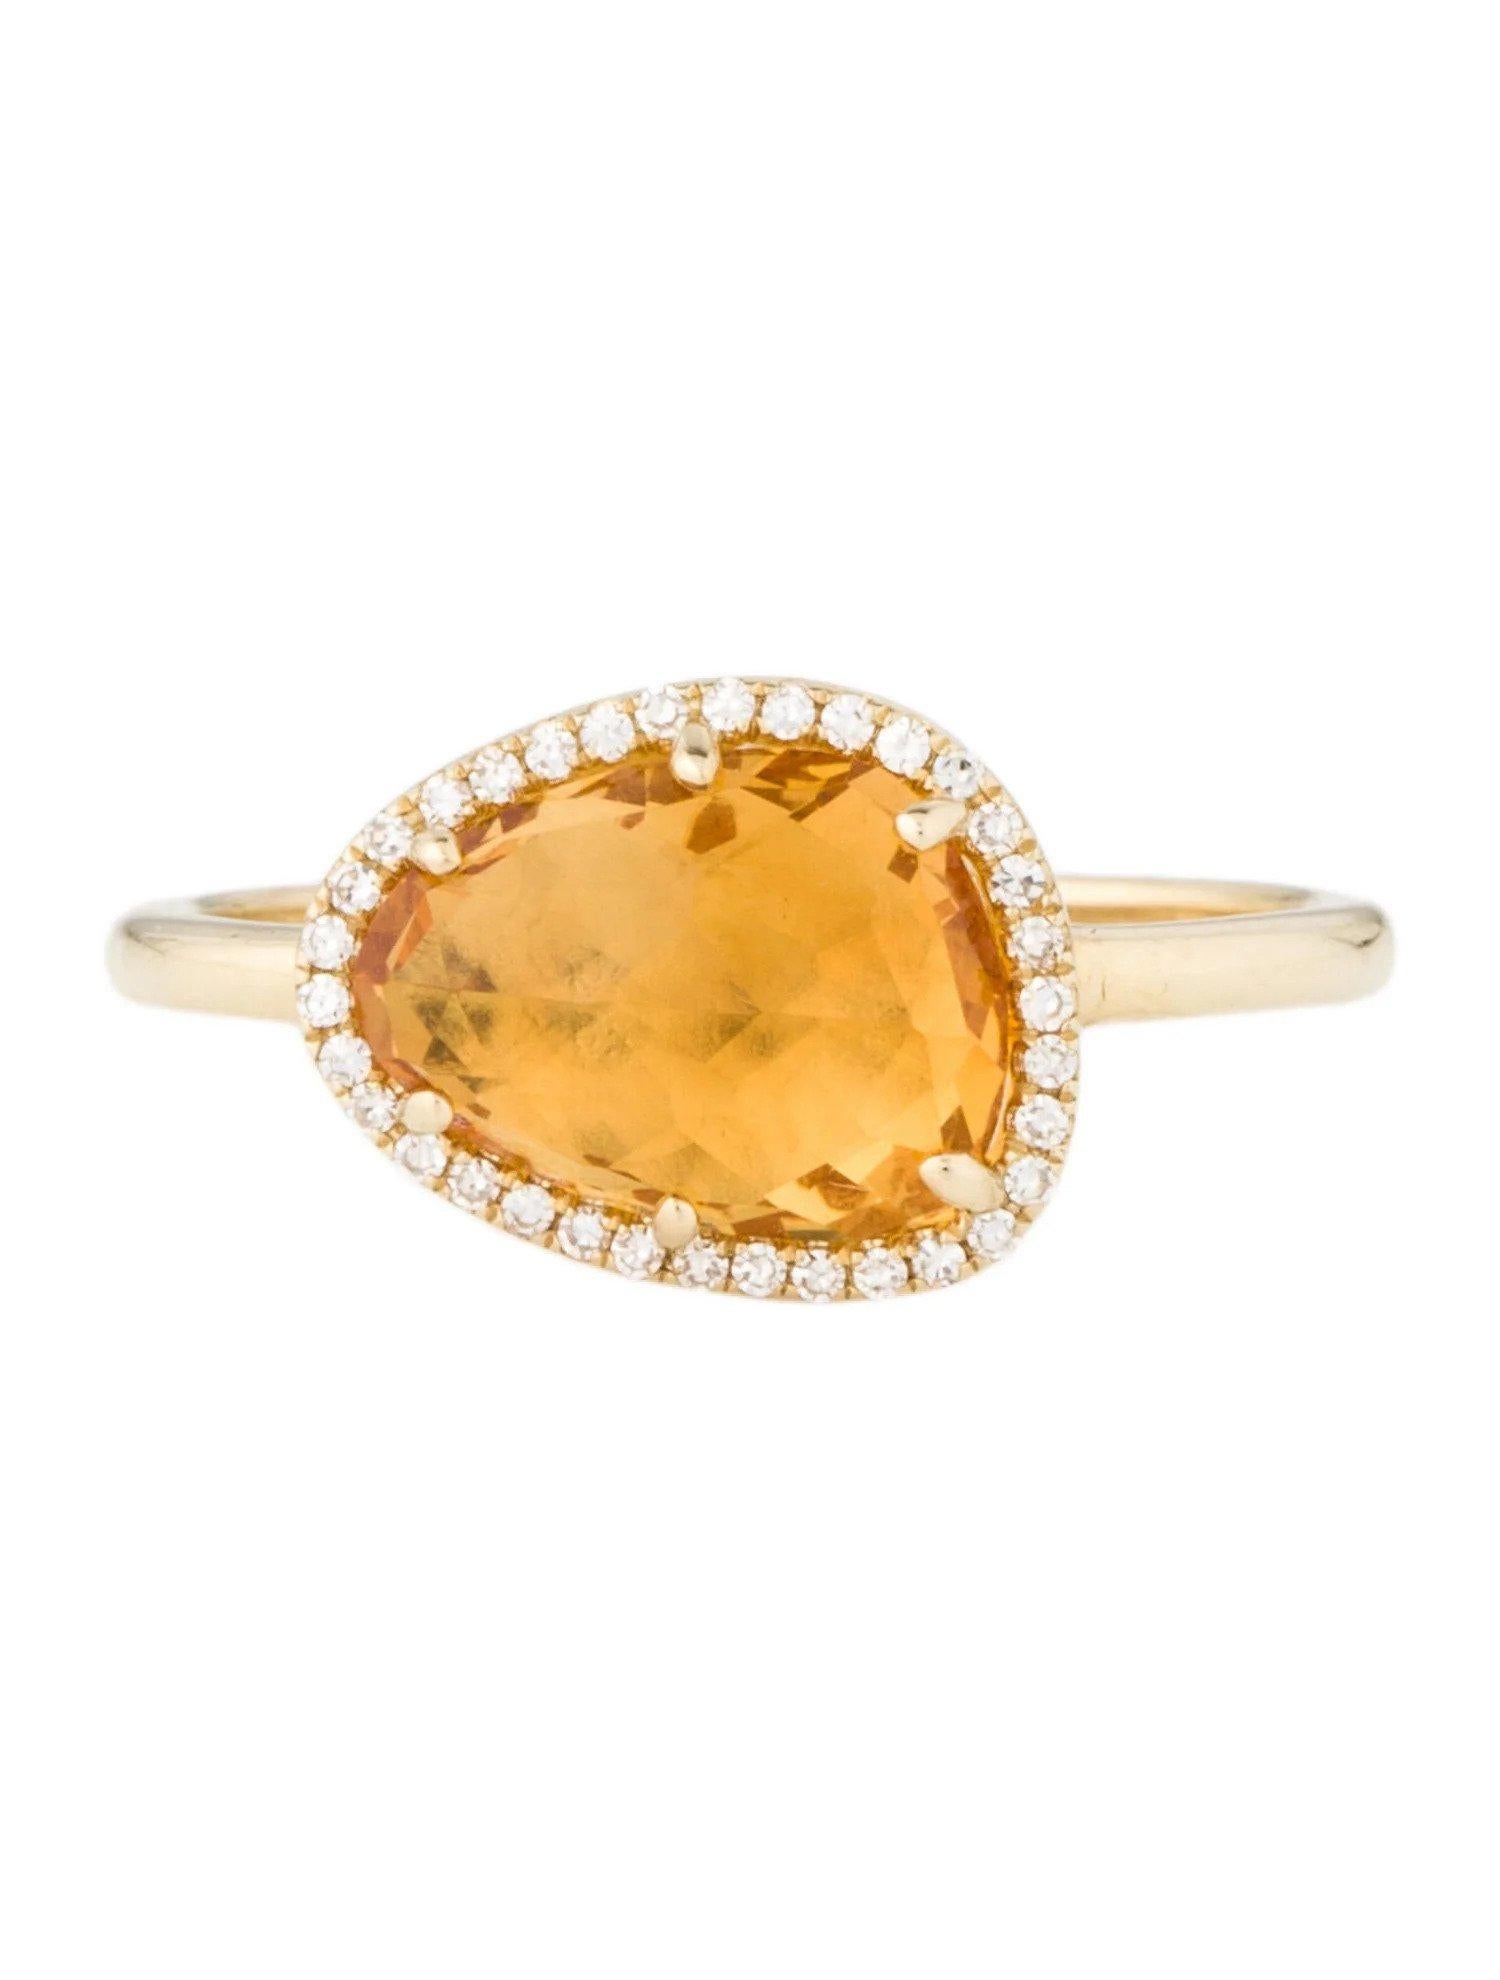 This Citrine & Diamond Ring is a stunning and timeless accessory that can add a touch of glamour and sophistication to any outfit. 

This ring features a 2.03 Carat Mixed Cut Citrine (12 x 9 MM), with a Diamond Halo comprised of 0.08 Carats of